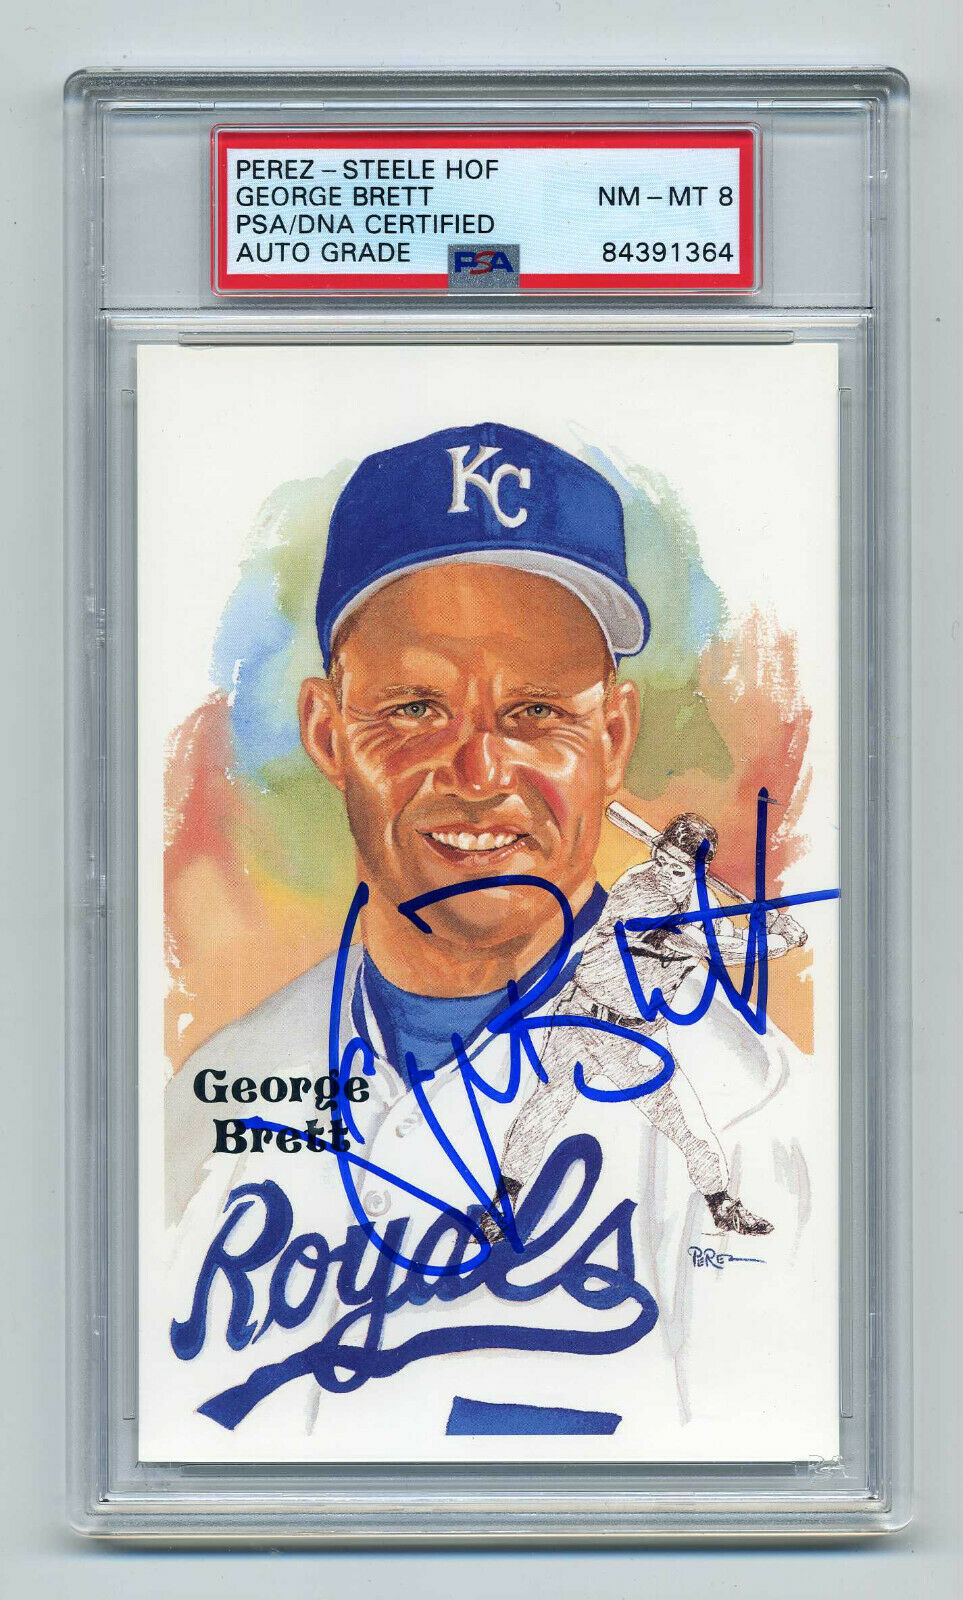 Outstanding George Brett  Psa/dna Autographed  Perez Steele Post Card